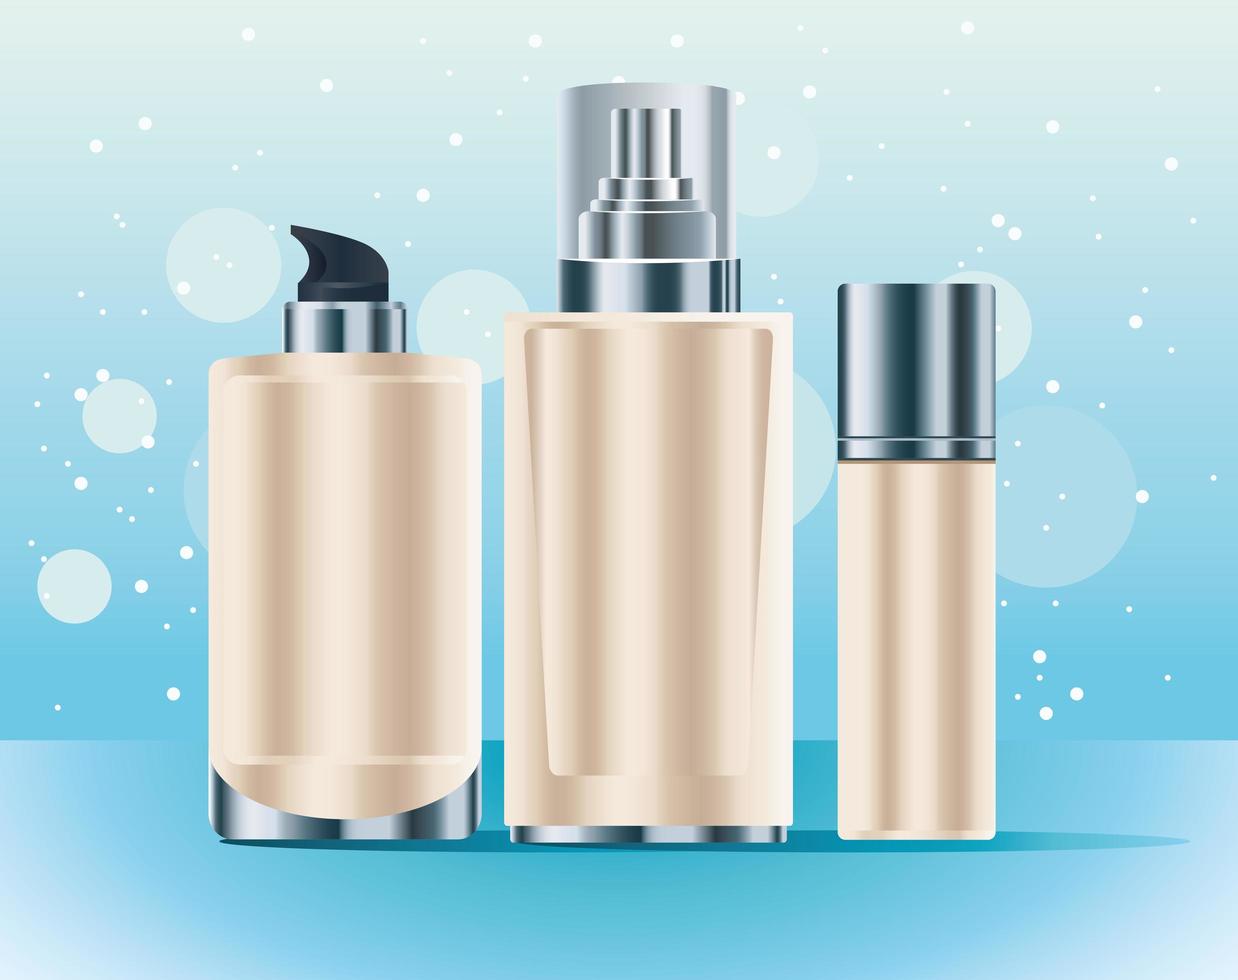 set of three skin care bottles cream color products icons vector